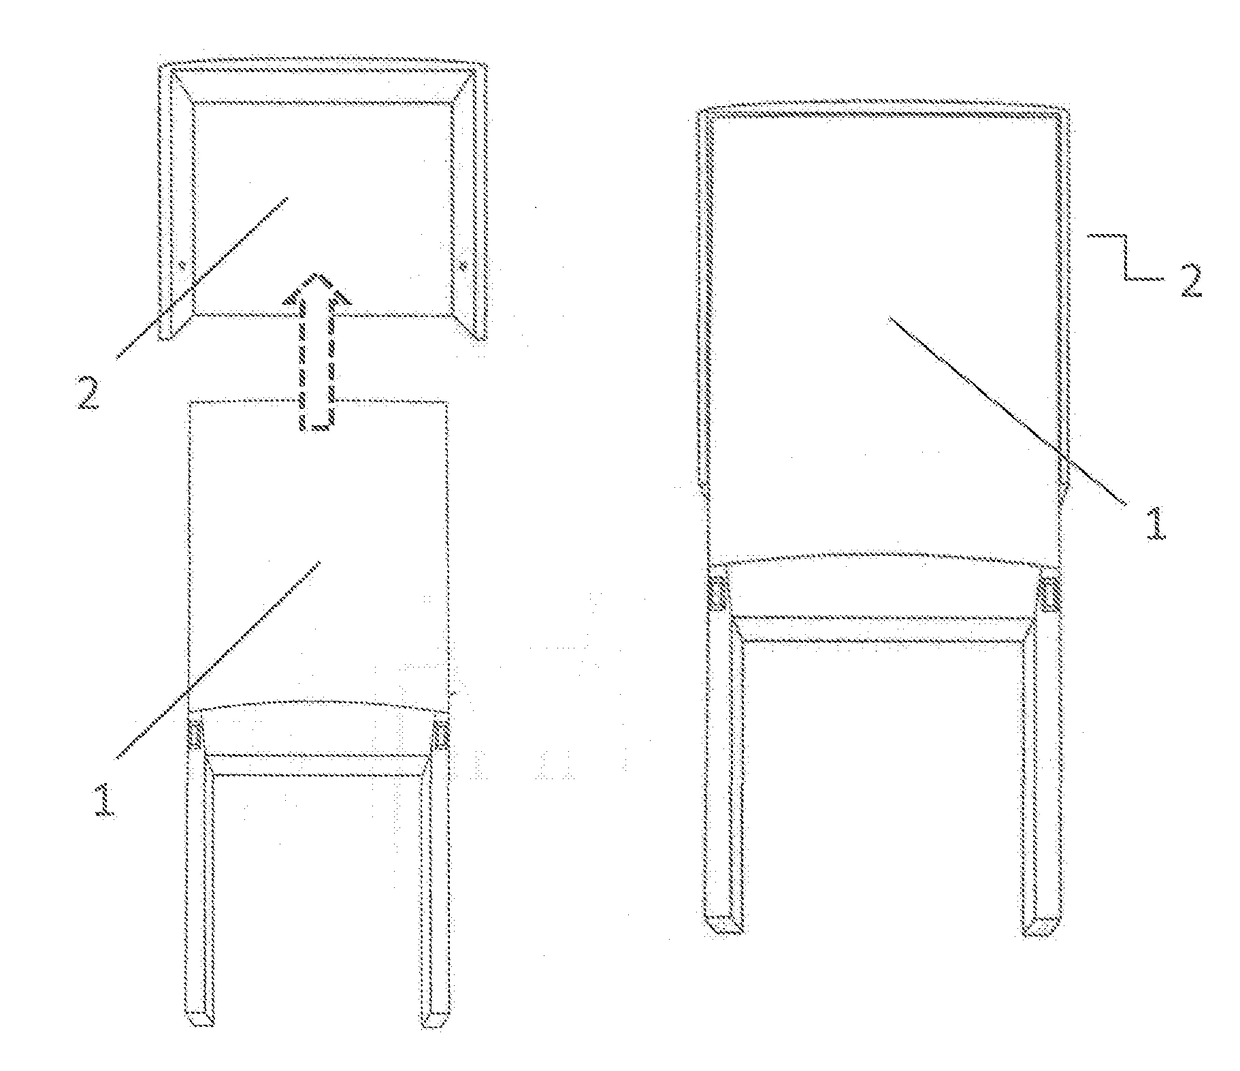 KD Chair and Stool Construction